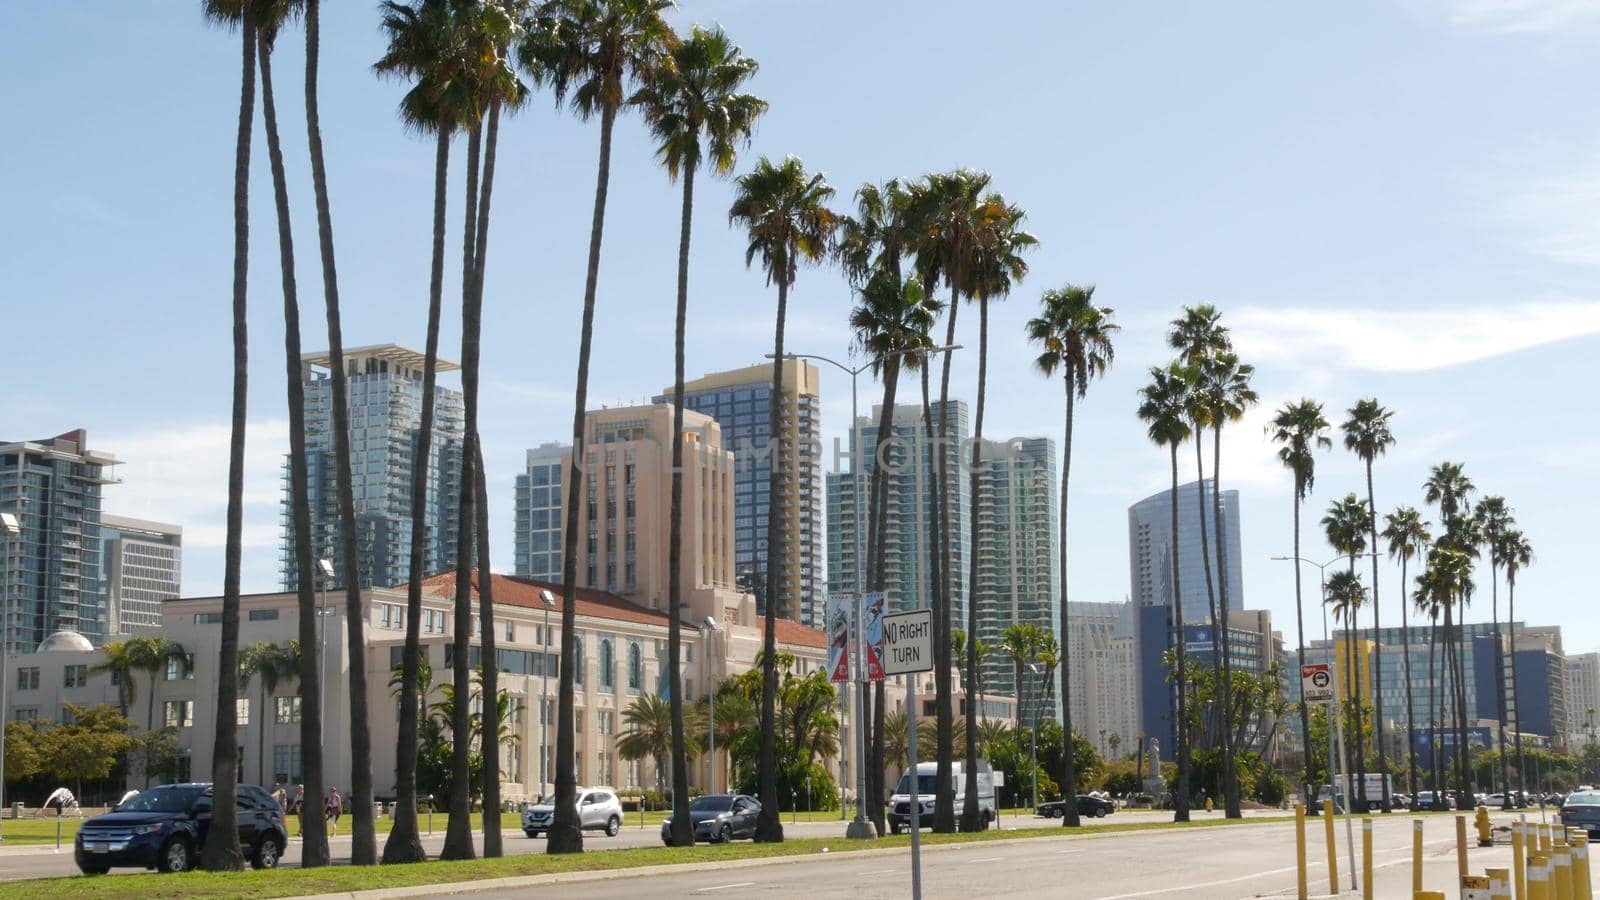 SAN DIEGO, CALIFORNIA USA - 30 JAN 2020: County civic center in downtown. Urban skyline of Gaslamp Quarter. Cityscape of metropolis, pacific harbour waterfront with palm trees. Cars drive on road.